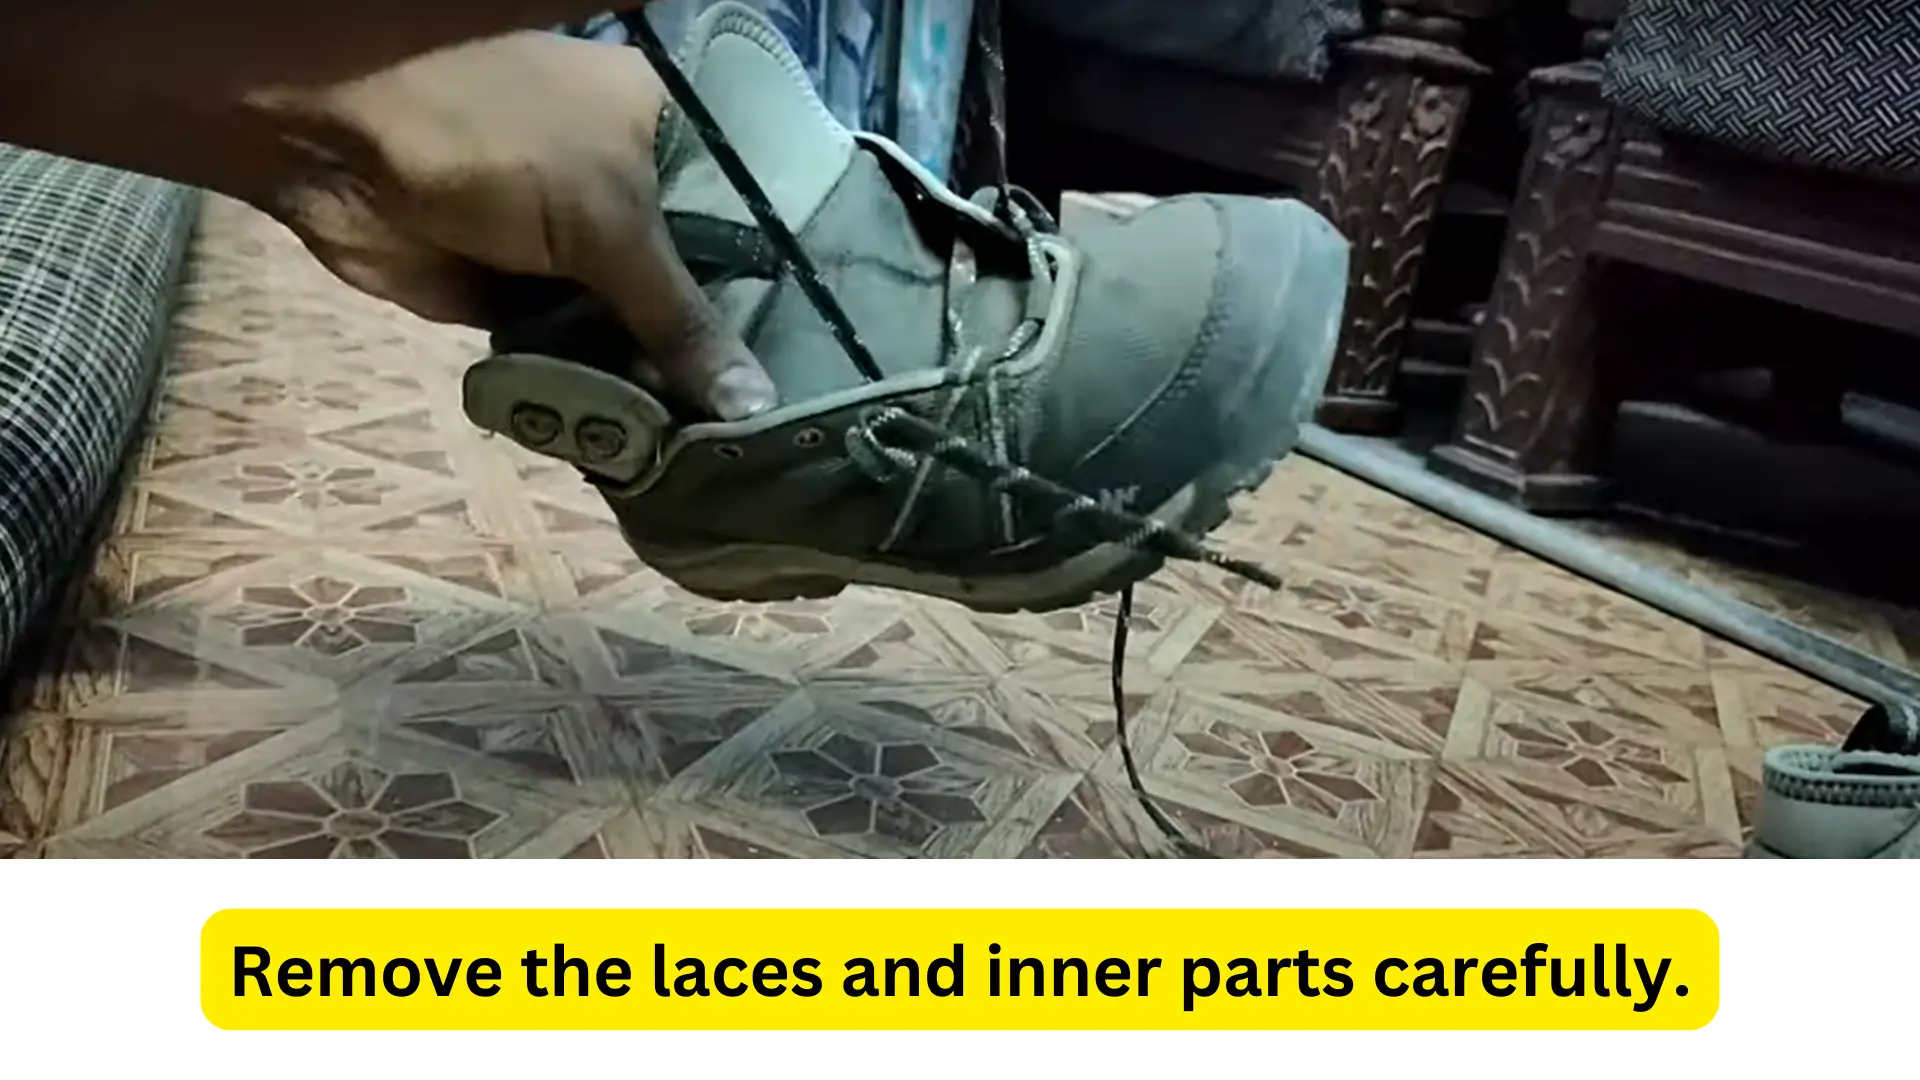 removing the laces and inner parts from a hiking boot image